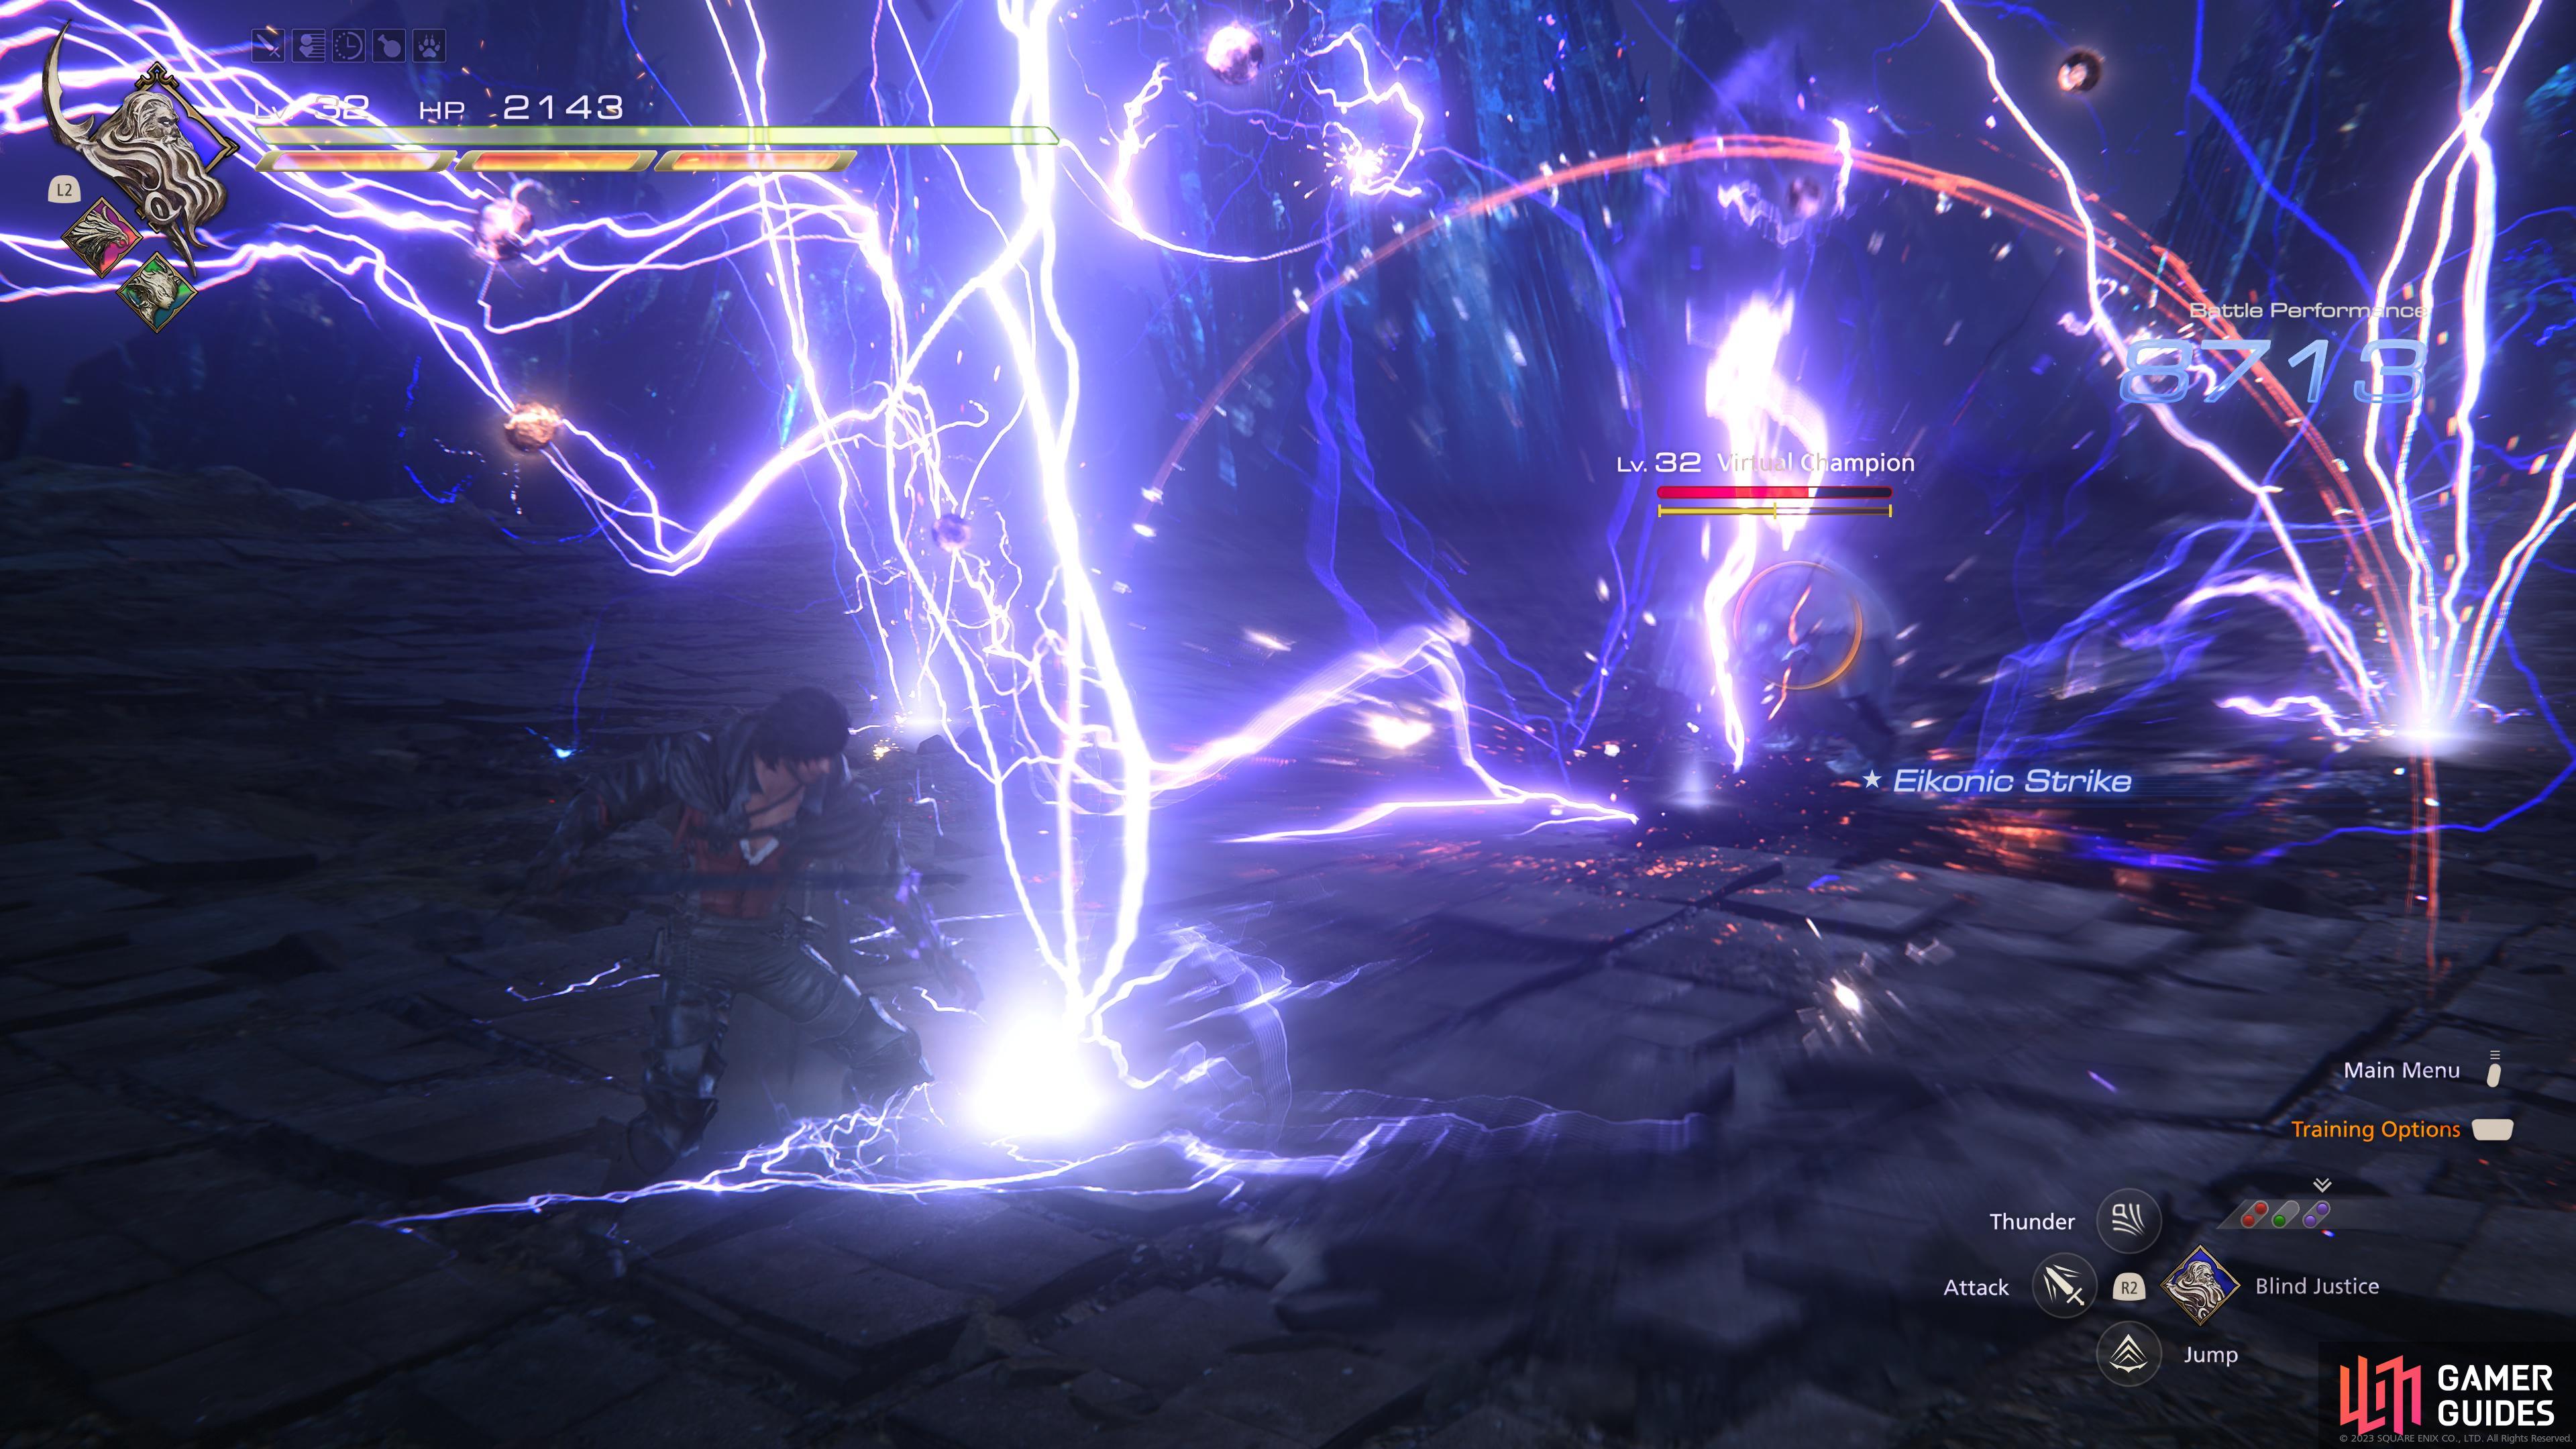 !Judgment Bolt will deal massive damage at the expense of a long cooldown.